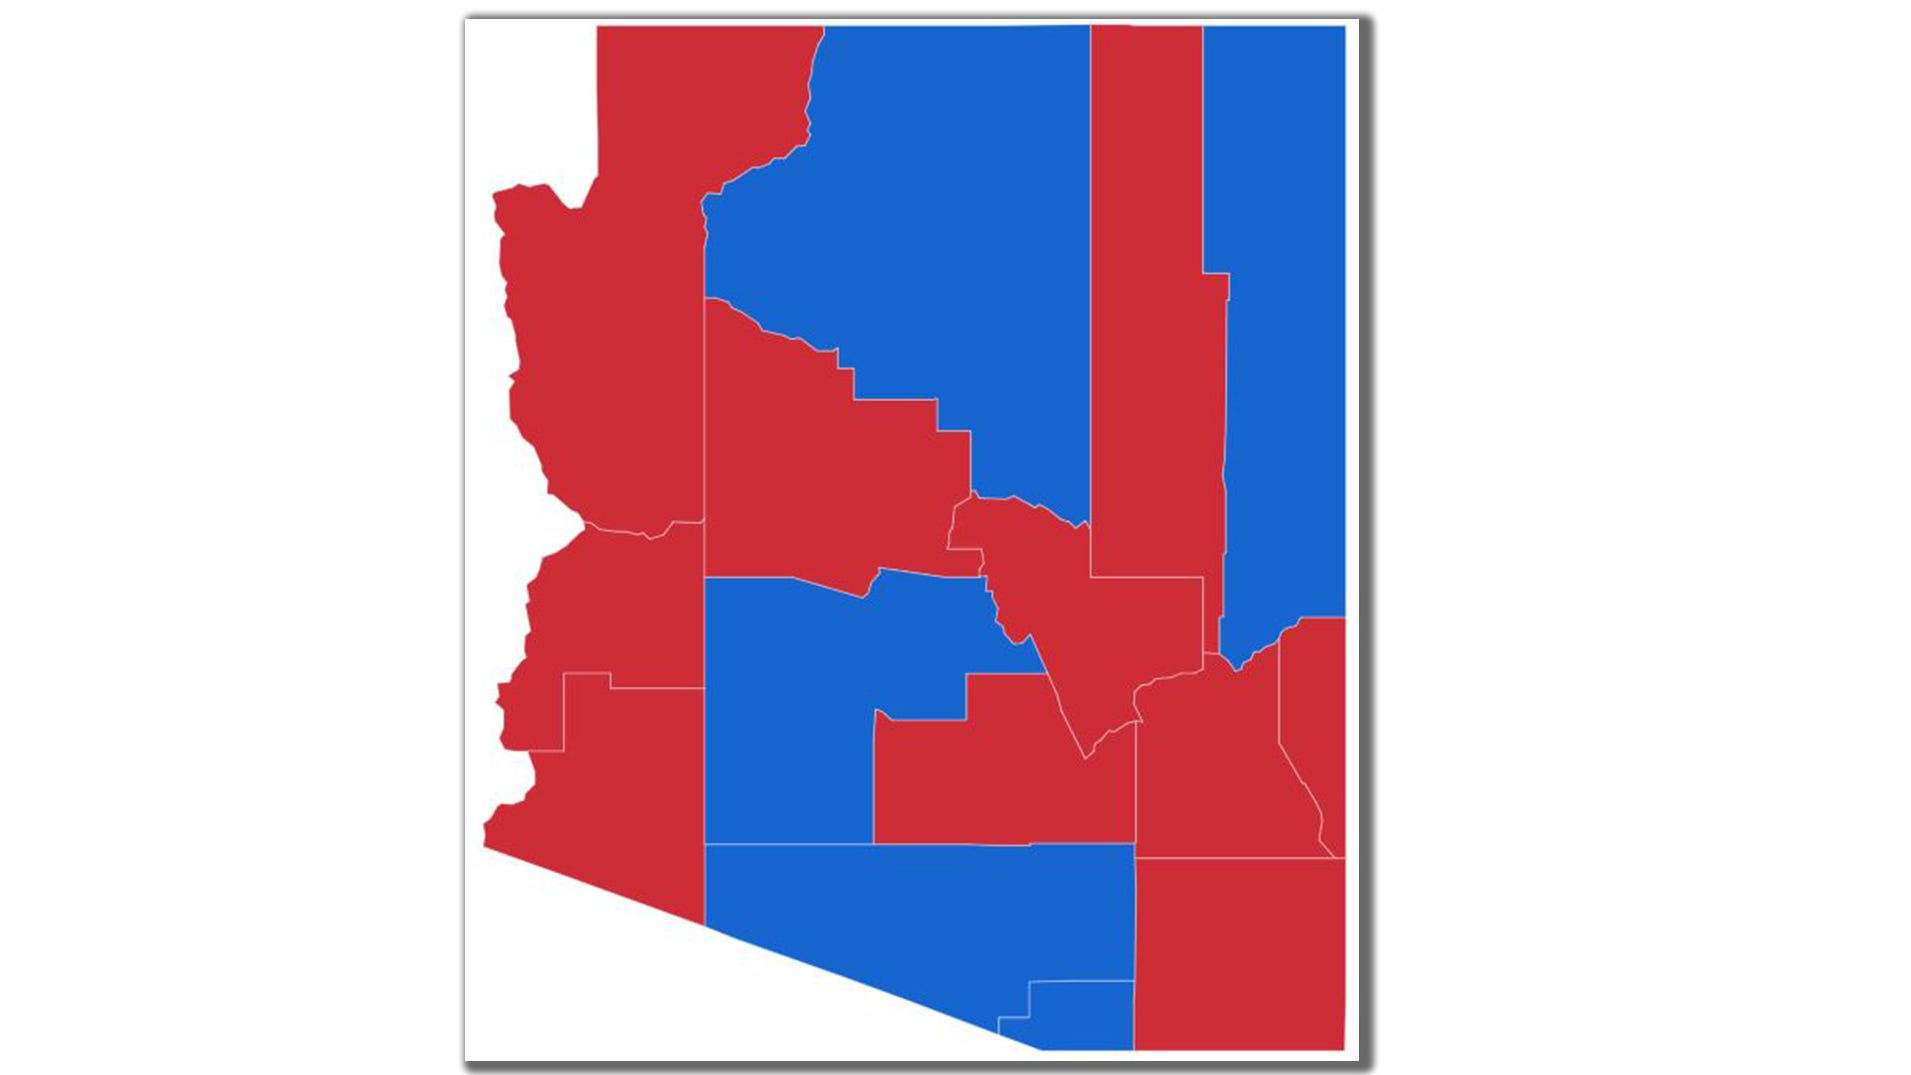 Election Arizona 2022 voting patterns show usual rural, urban divide